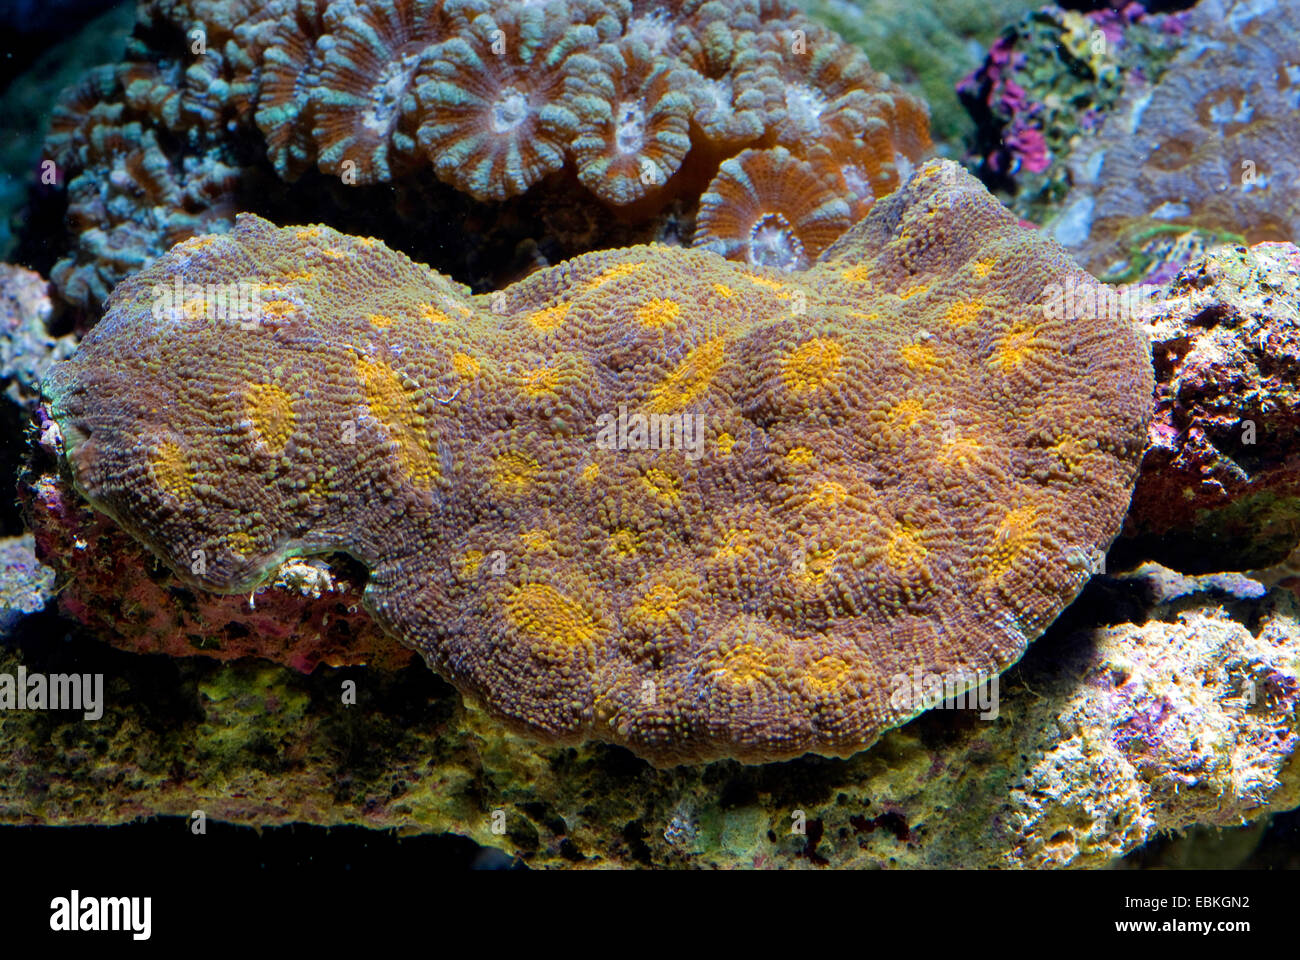 Stony coral (Acanthastrea spec.), close-up view Stock Photo